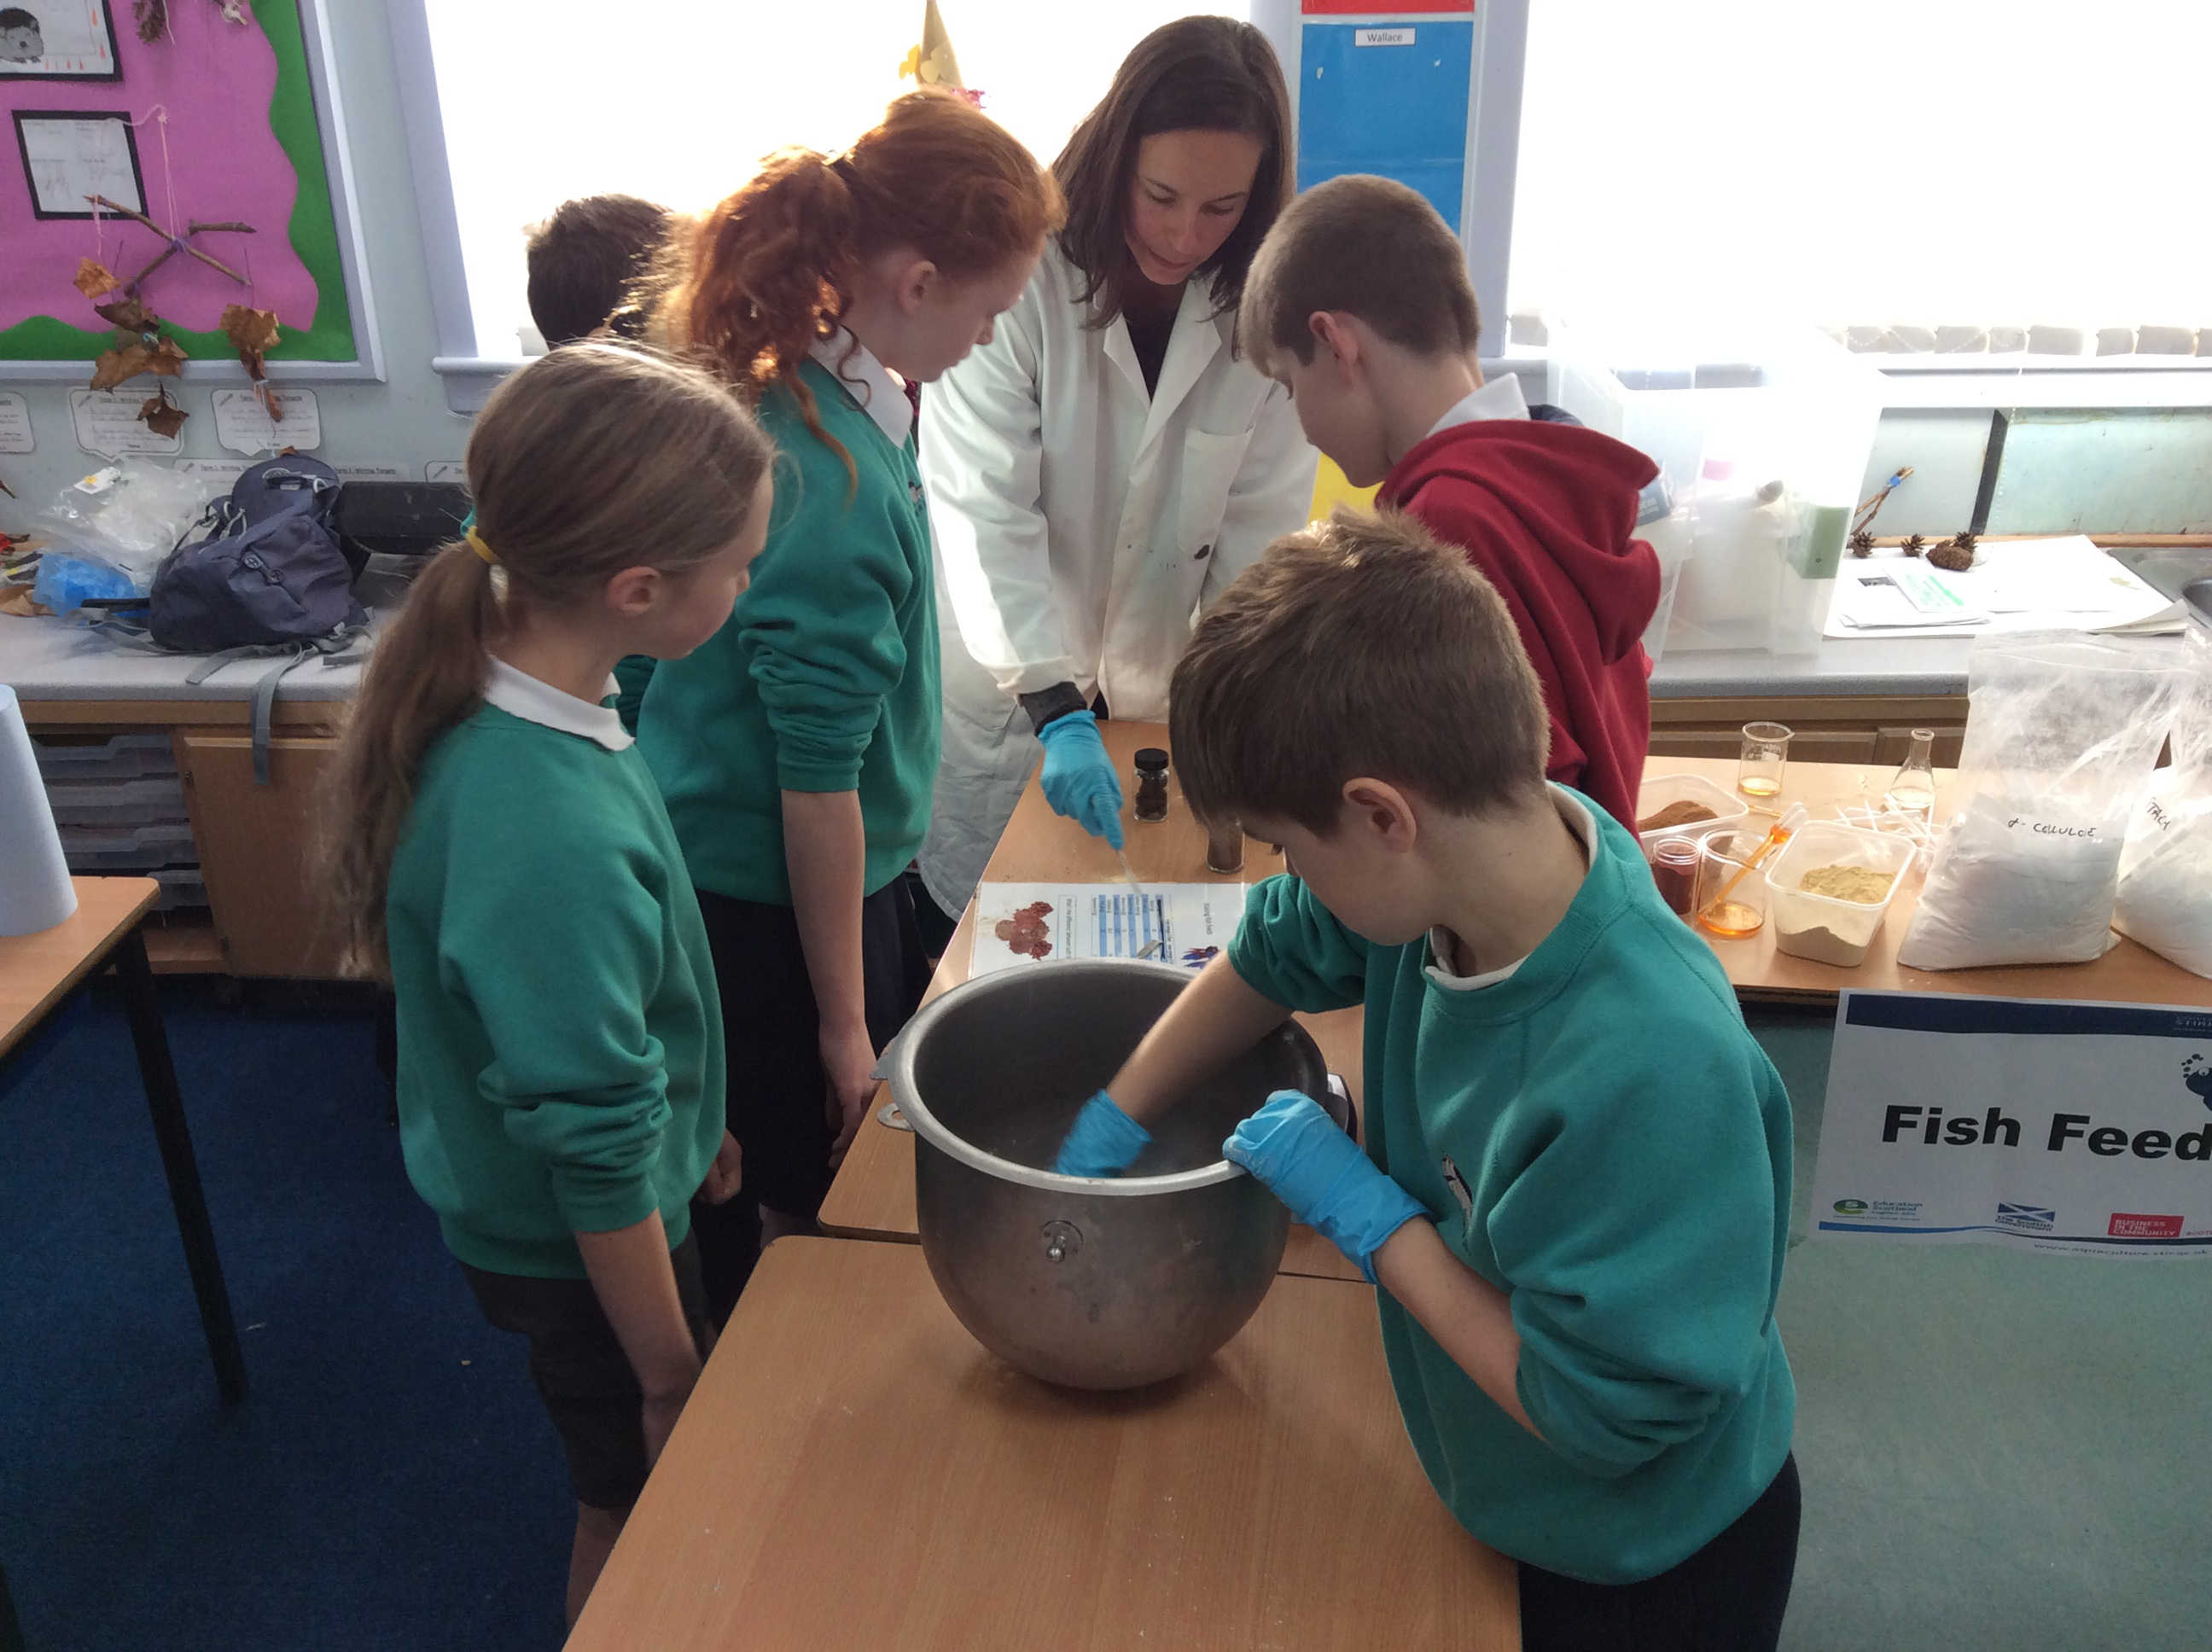 The hands-on lessons taught primary school pupils about the health benefits of eating fish